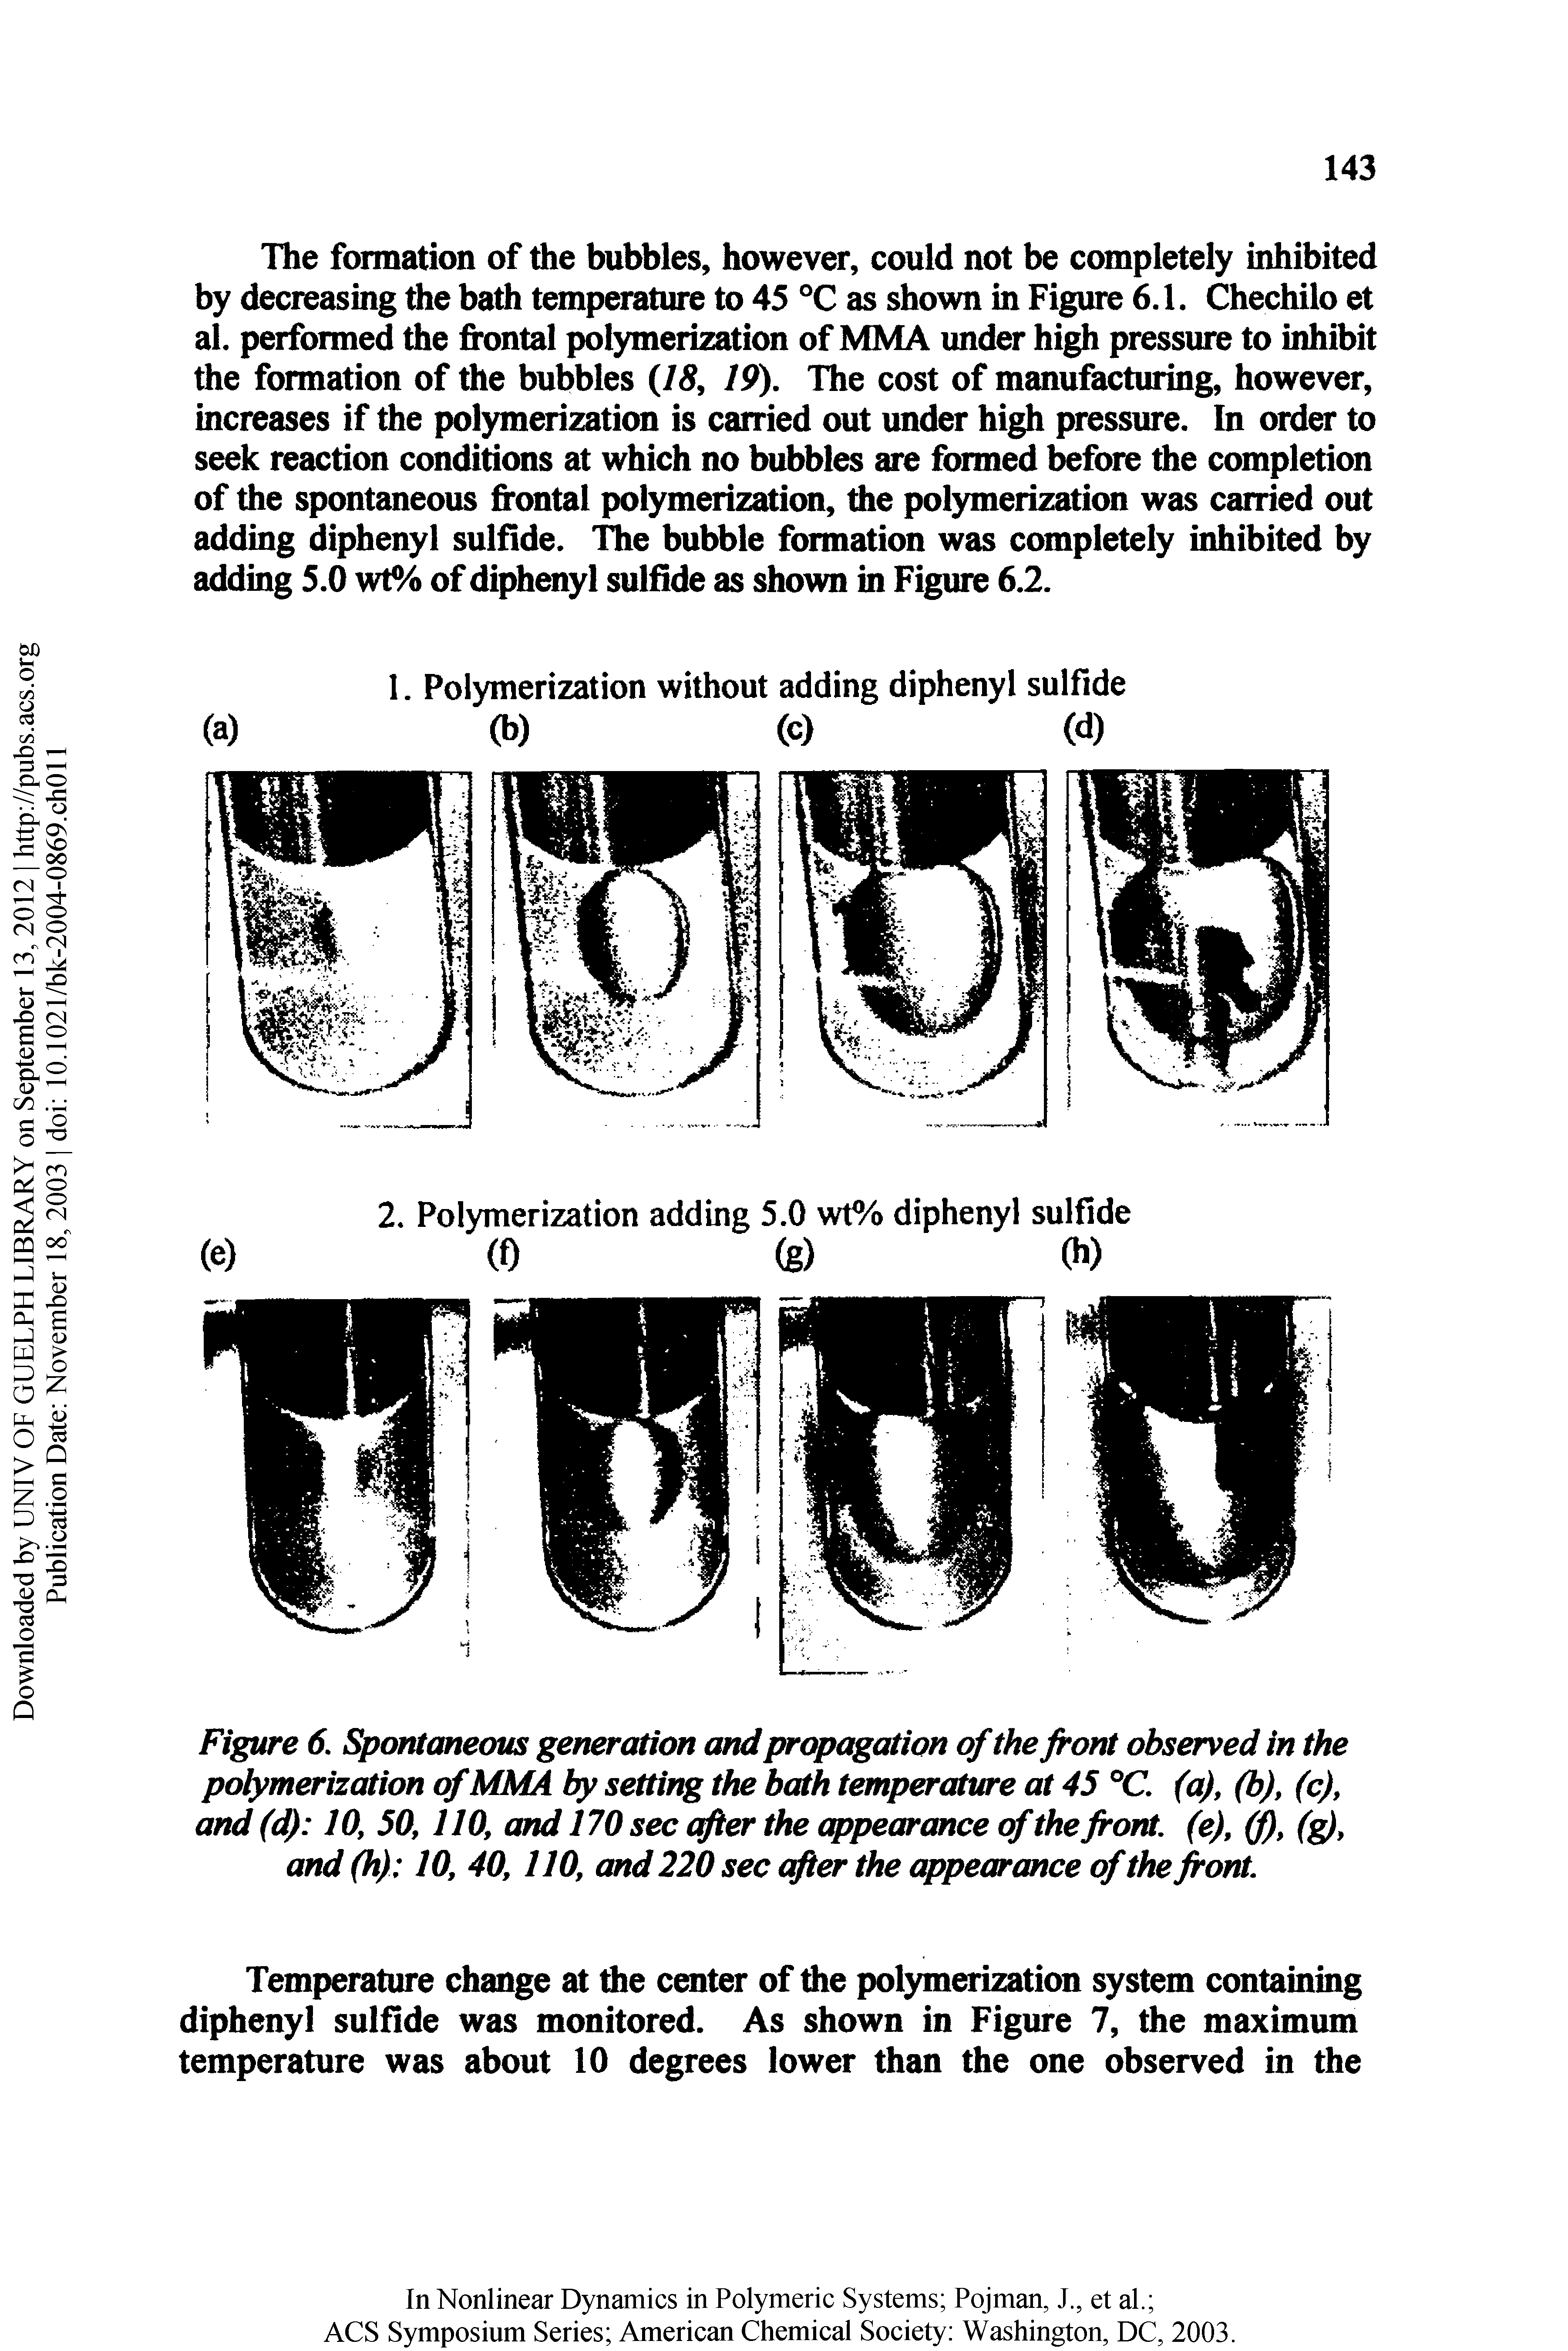 Figure 6. Spontaneous generation and pr<q>agation of the front observed in the polymerization of MMA by setting the bath temperature at 45 °C. (a), (b), (c), ami (d) 10, 50,110, and 170 sec cfrer the cppearance of thefront, (e), (f), (, and (h) 10, 40,110, and220 sec after the appearance cfthe front.